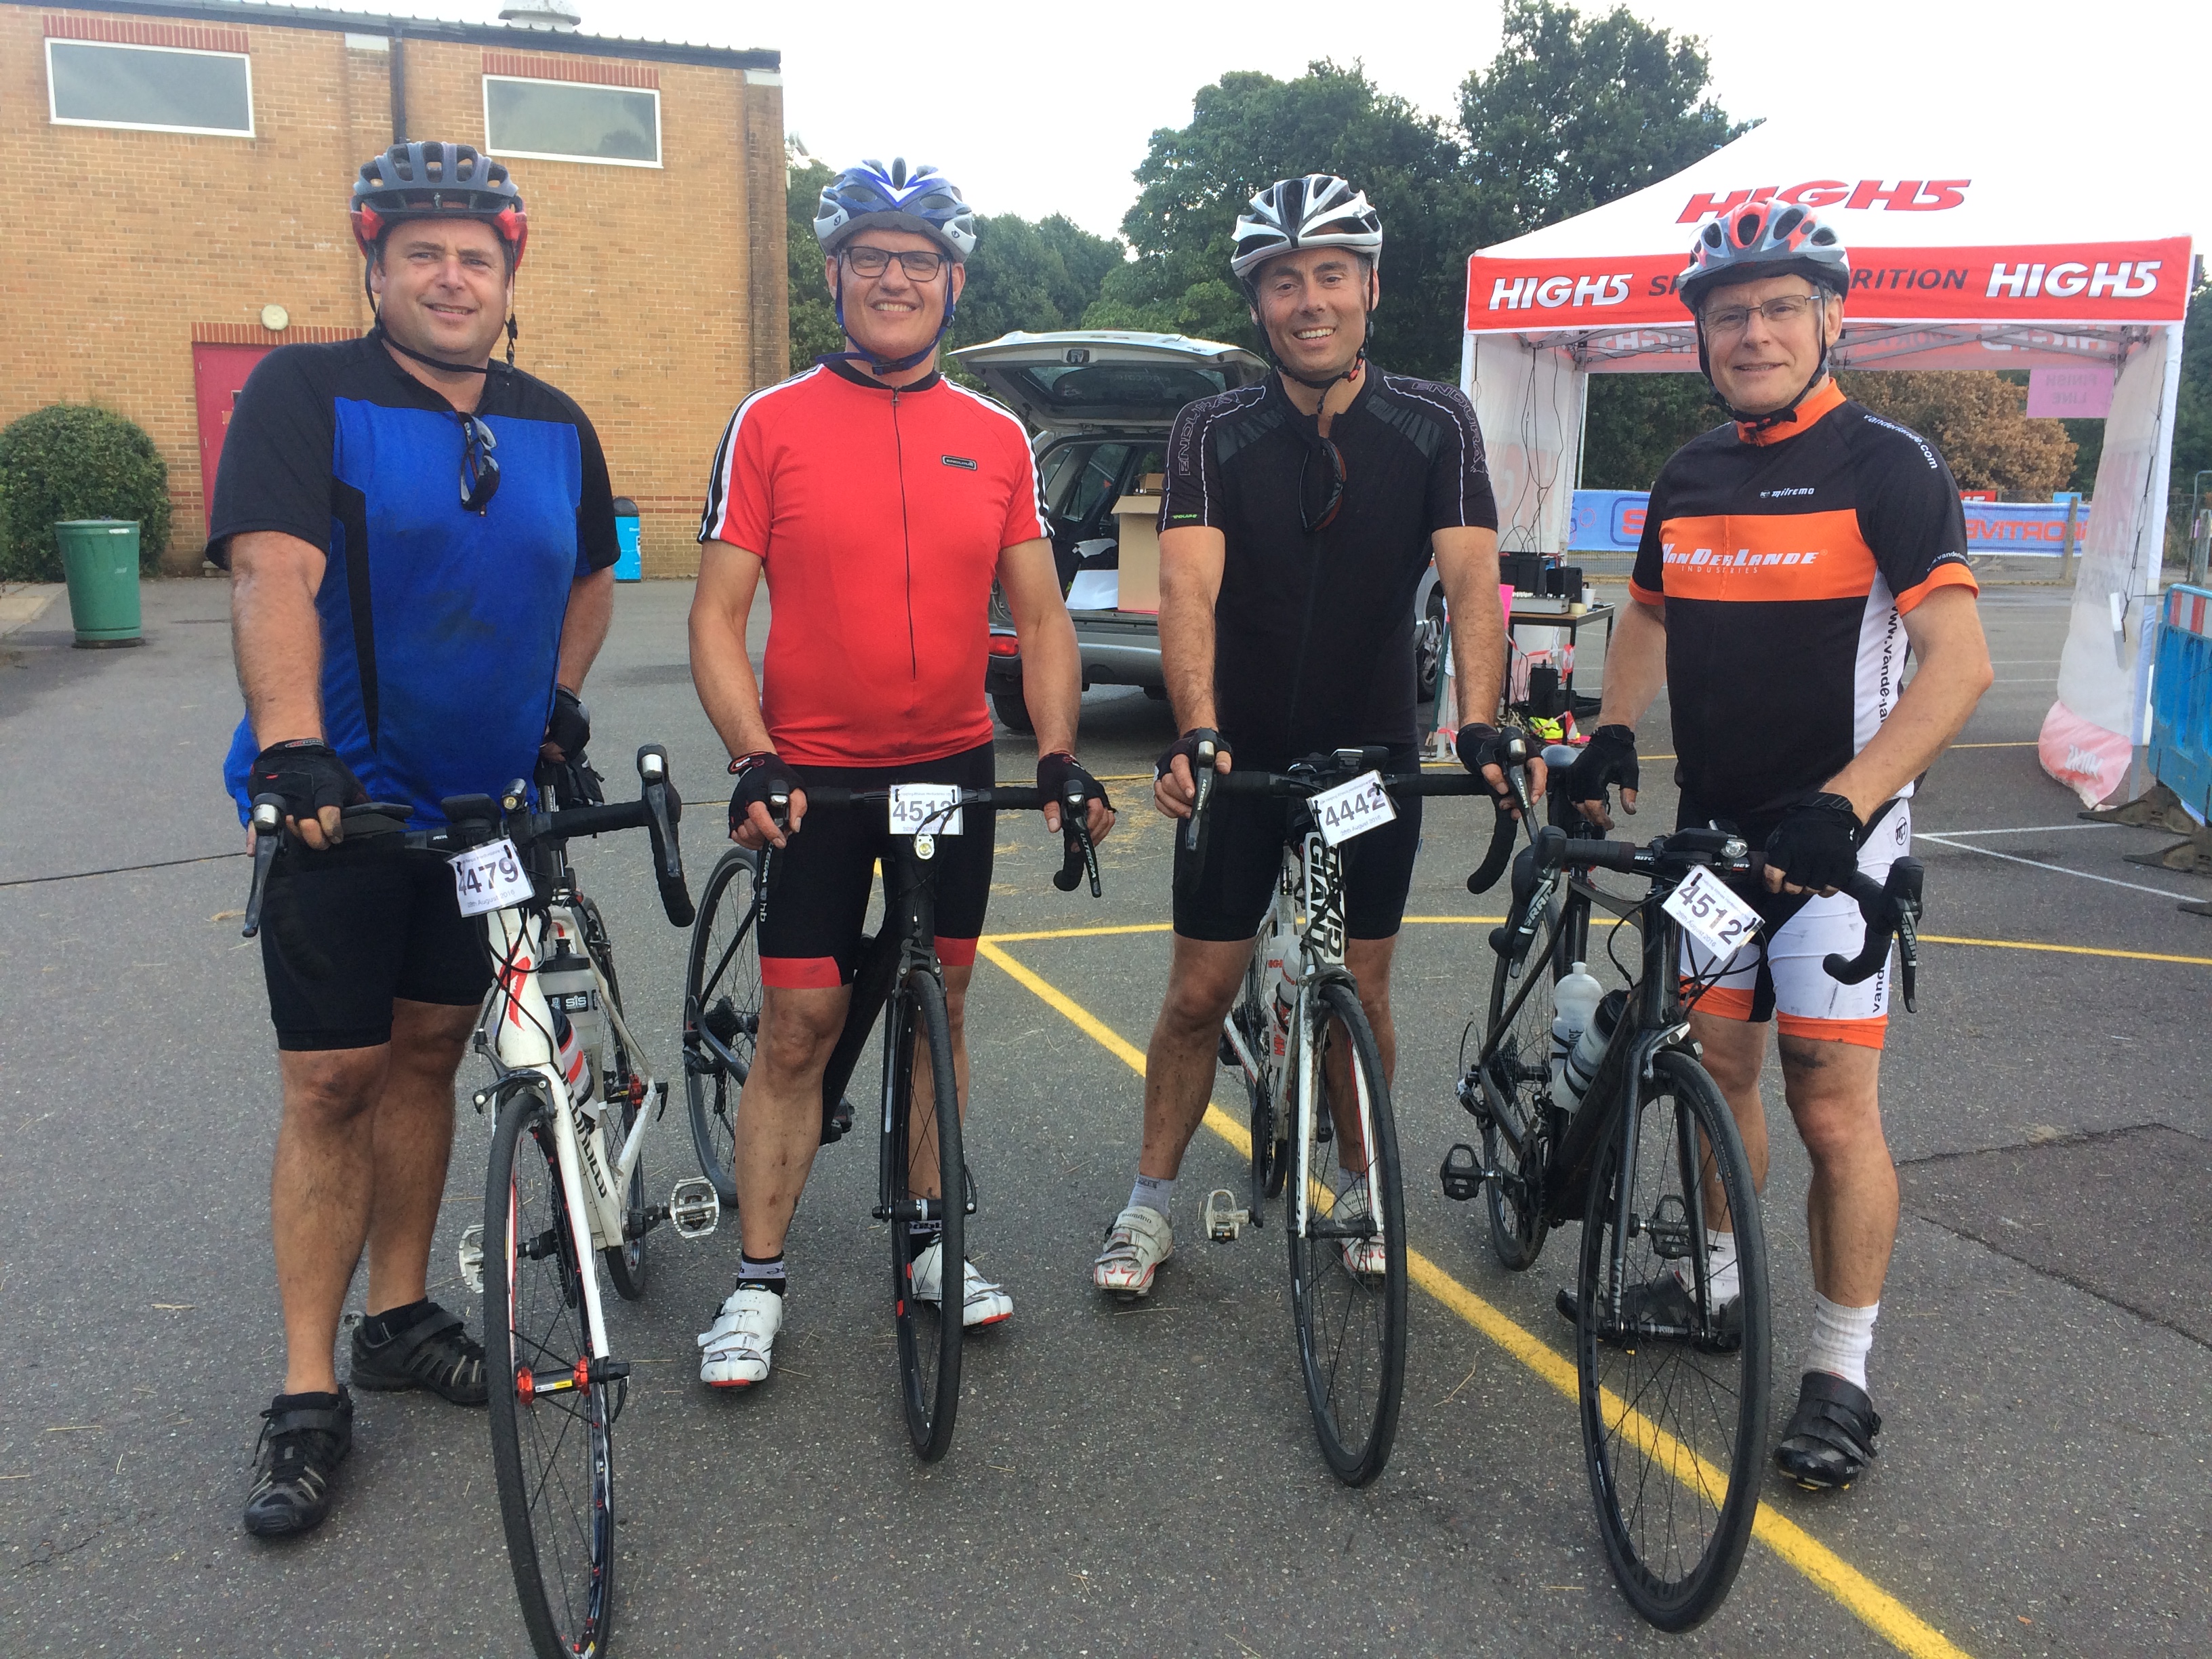 Four happy faces after 107 miles and seven punctures!